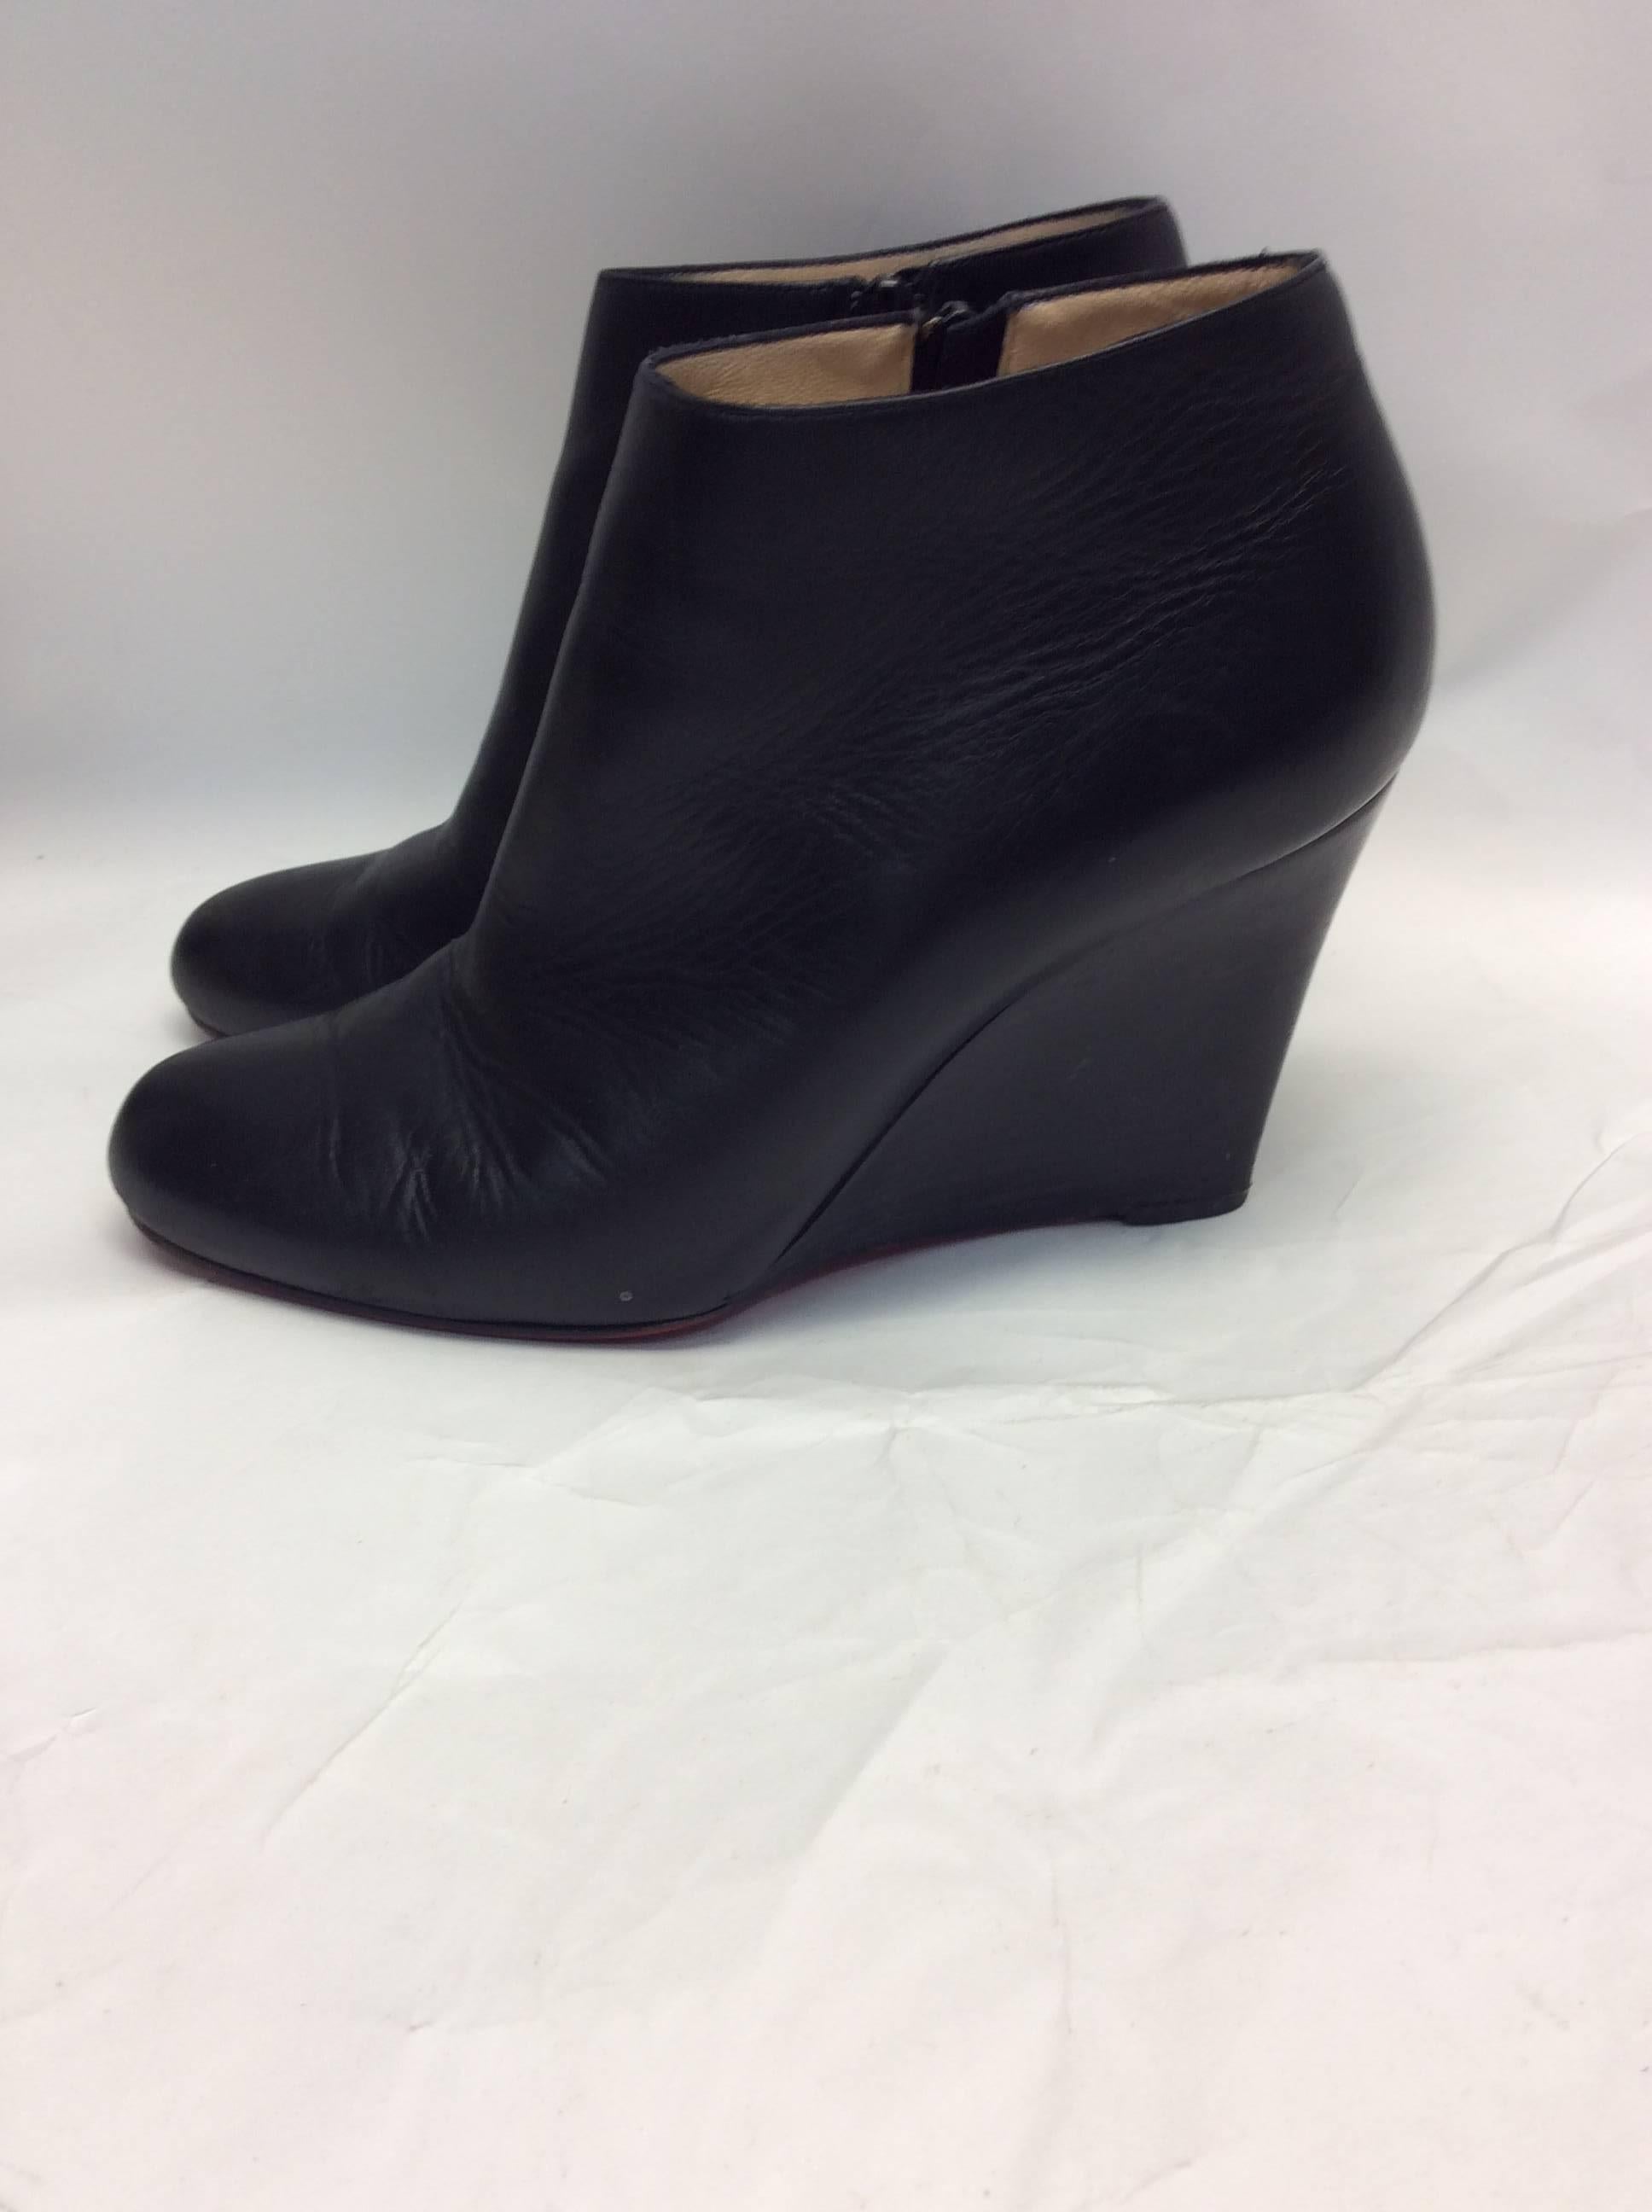 Christian Louboutin Black Leather Wedge Boots
Size 38.5
$299
Made in Italy
Leather
Beautiful black leather wedged Christian Louboutin bootie. 